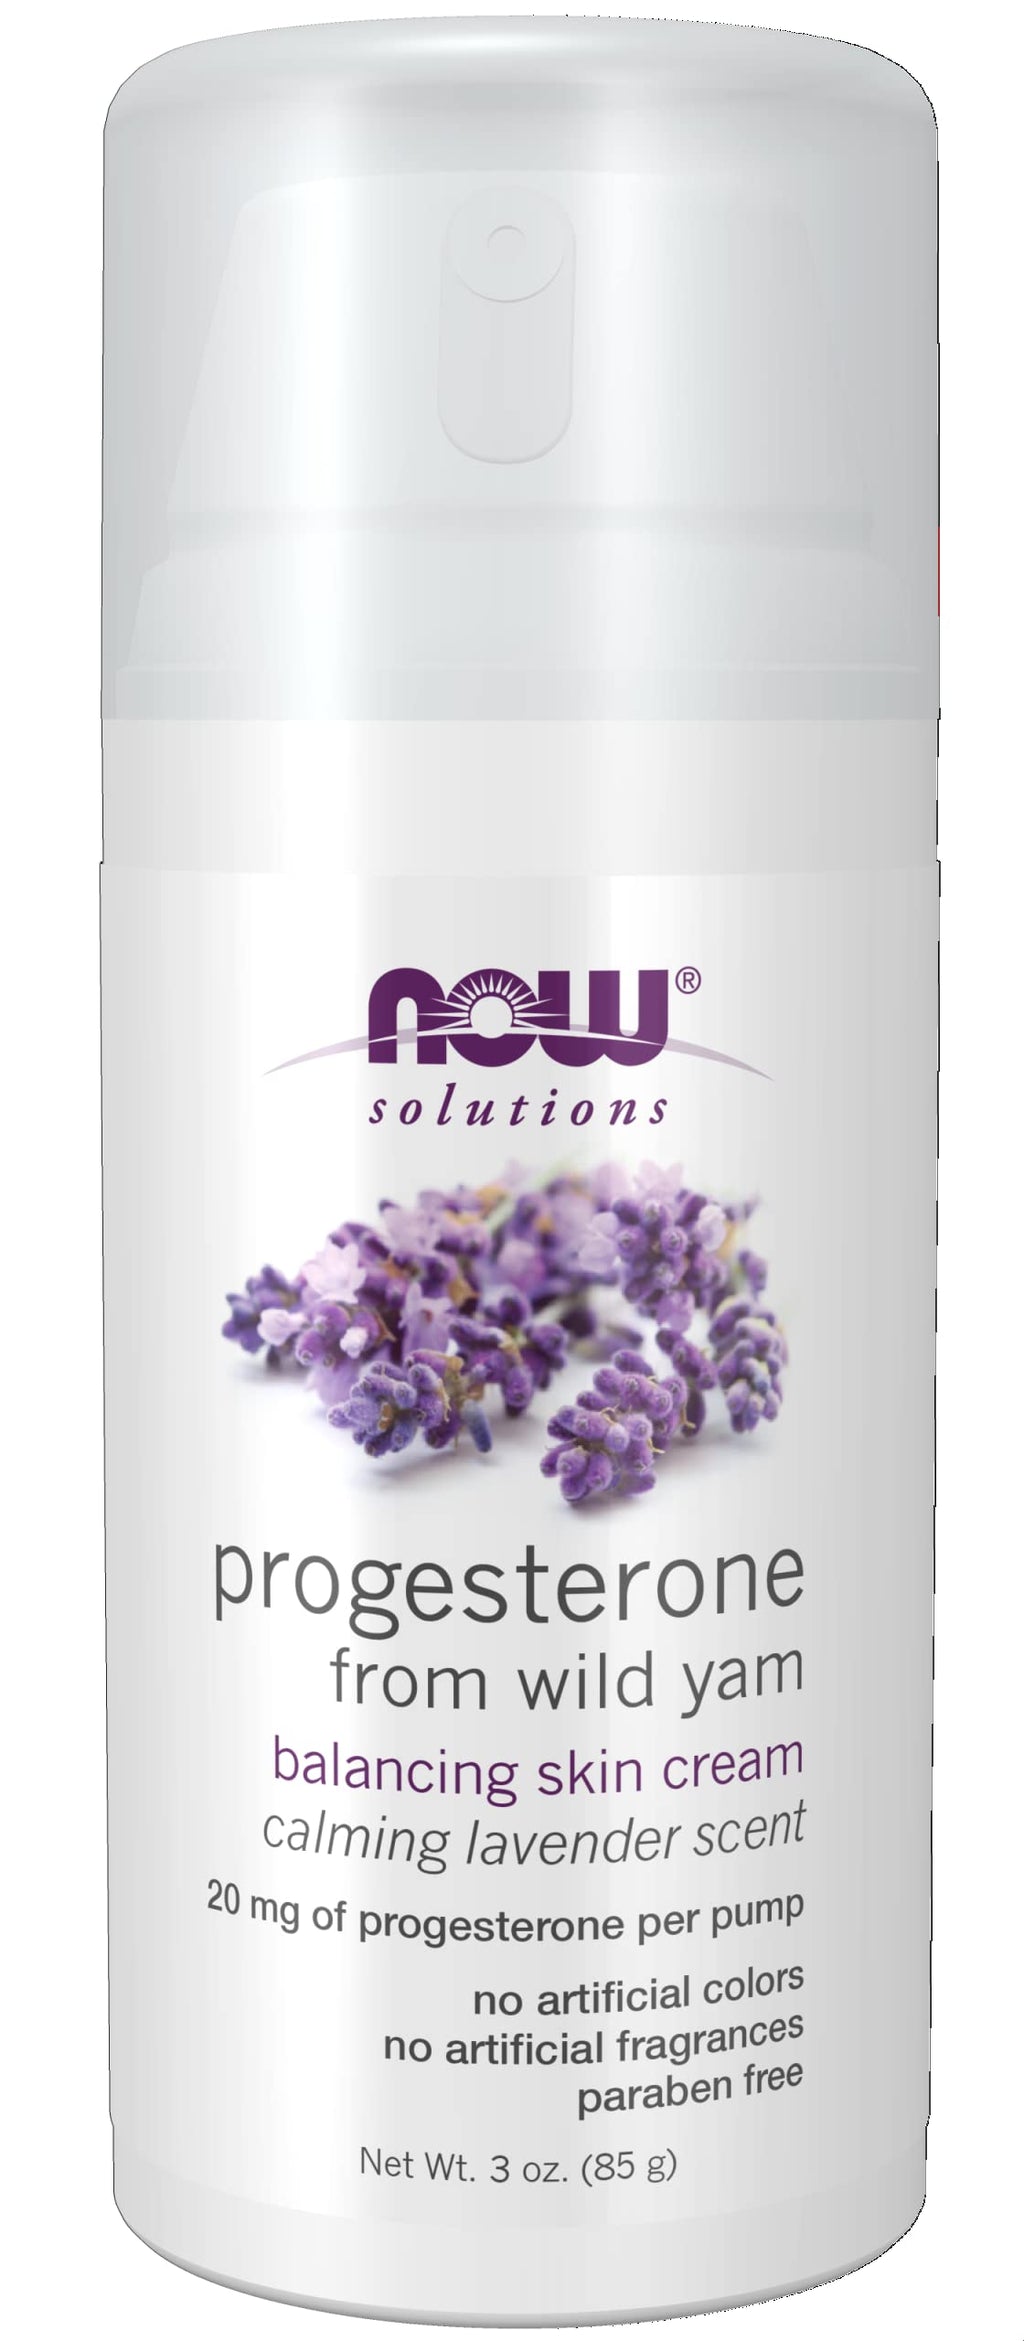 [Australia] - NOW Solutions, Natural Progesterone, Balancing Skin Cream with Lavender, 20 mg of Natural Progesterone Per Pump, 3-Ounce Calming Lavender 